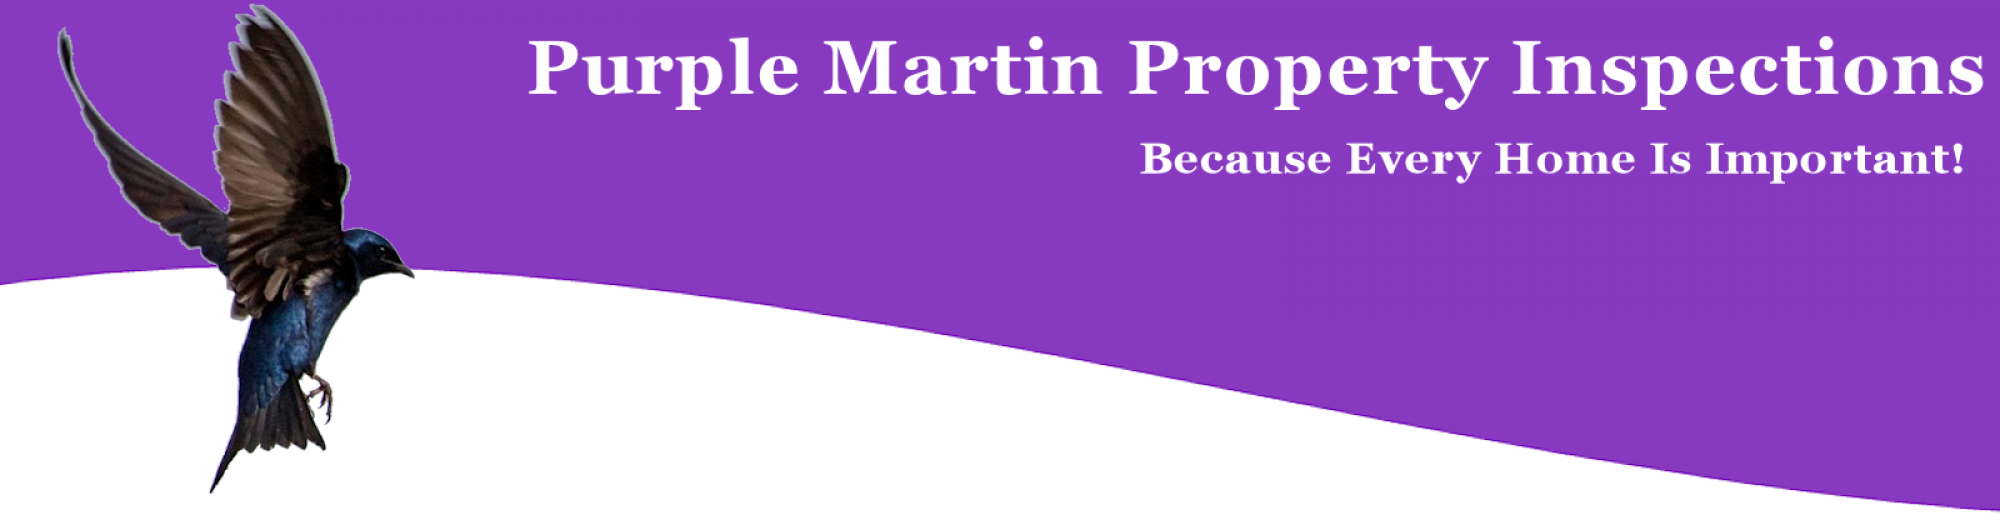 Purple Martin Home Inspections